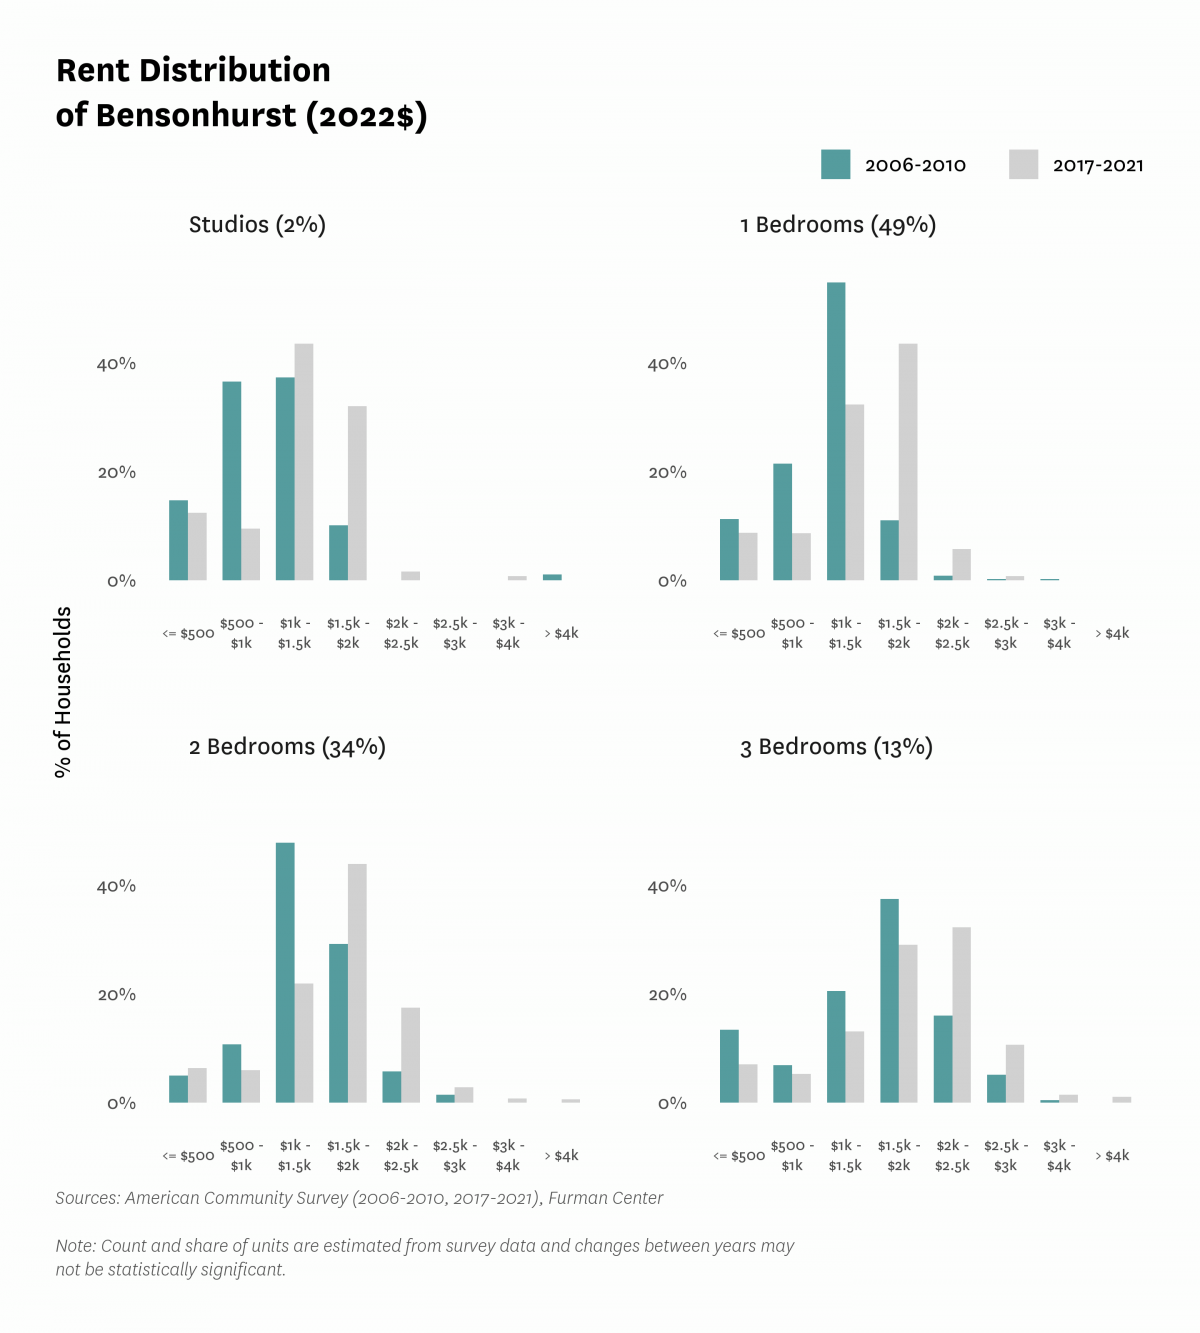 Graph showing the distribution of rents in Bensonhurst in both 2010 and 2017-2021.